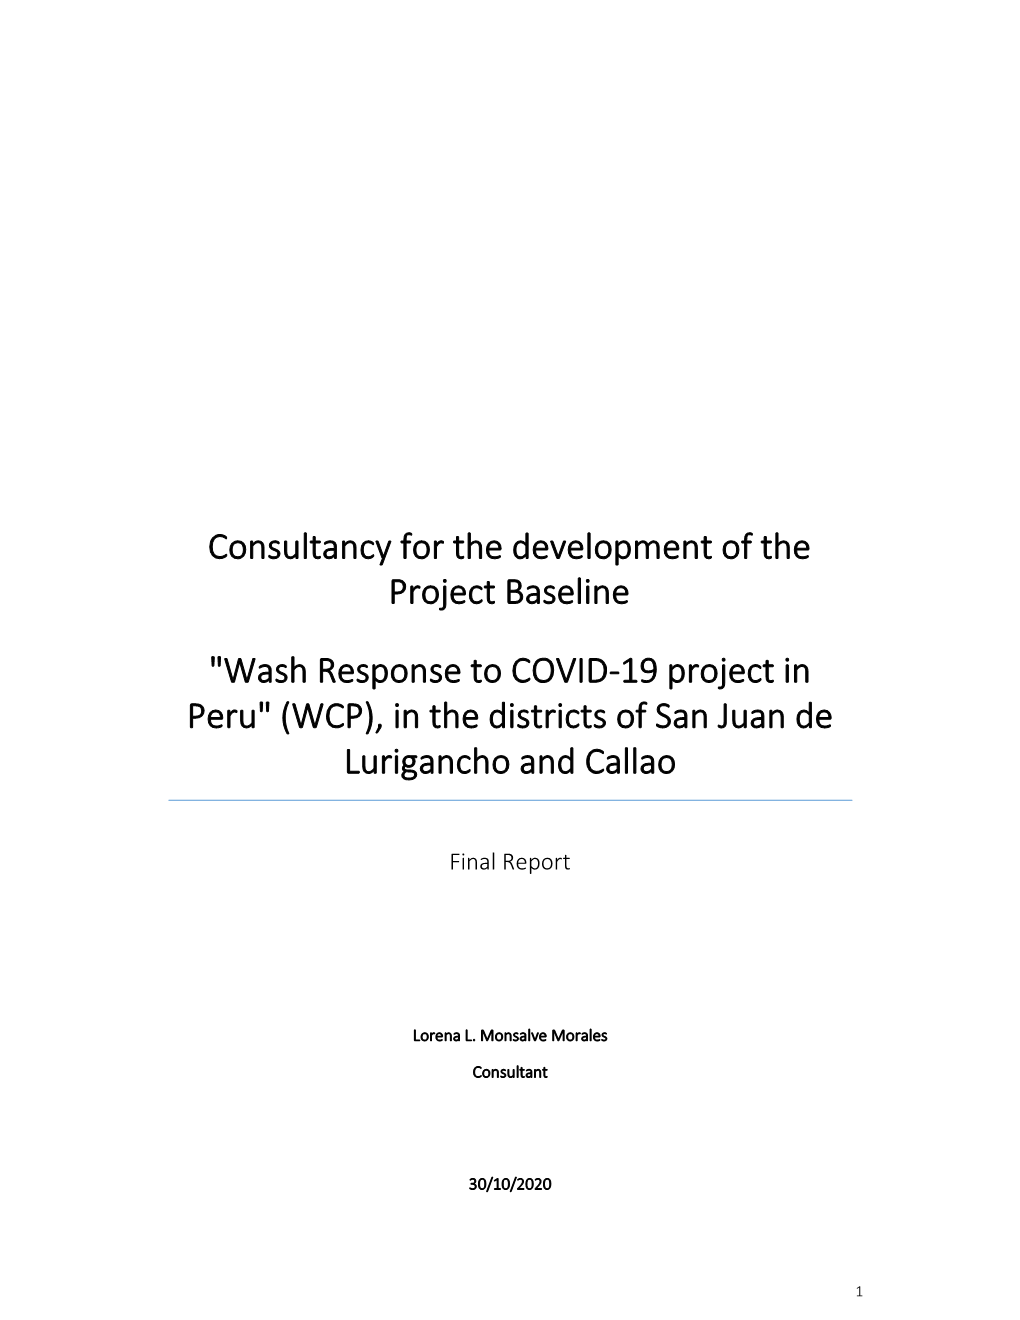 "Wash Response to COVID-19 Project in Peru" (WCP), in the Districts of San Juan De Lurigancho and Callao